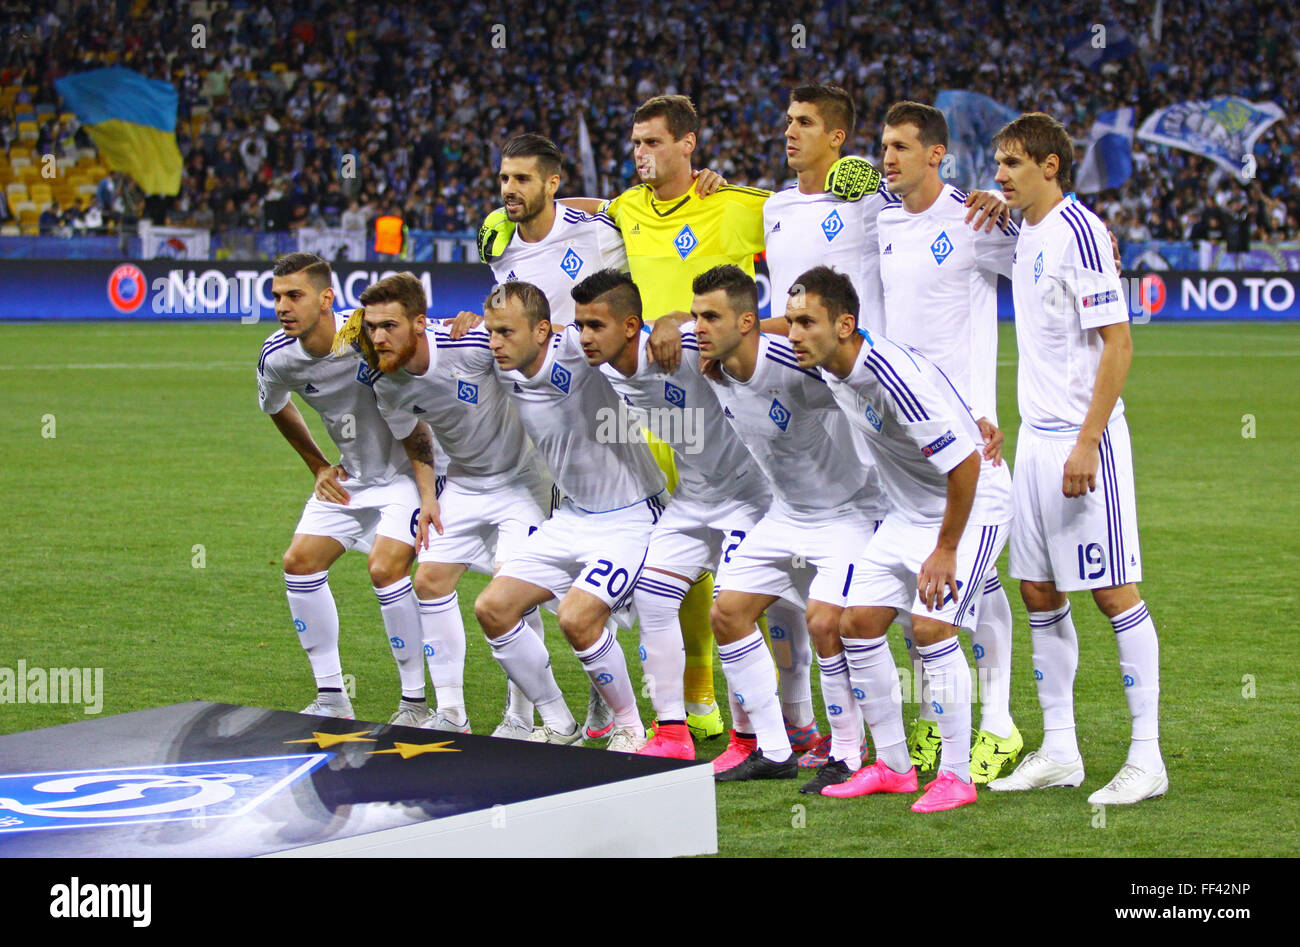 KYIV, UKRAINE - SEPTEMBER 16, 2015: FC Dynamo Kyiv players pose for a group photo before UEFA Champions League game against FC P Stock Photo